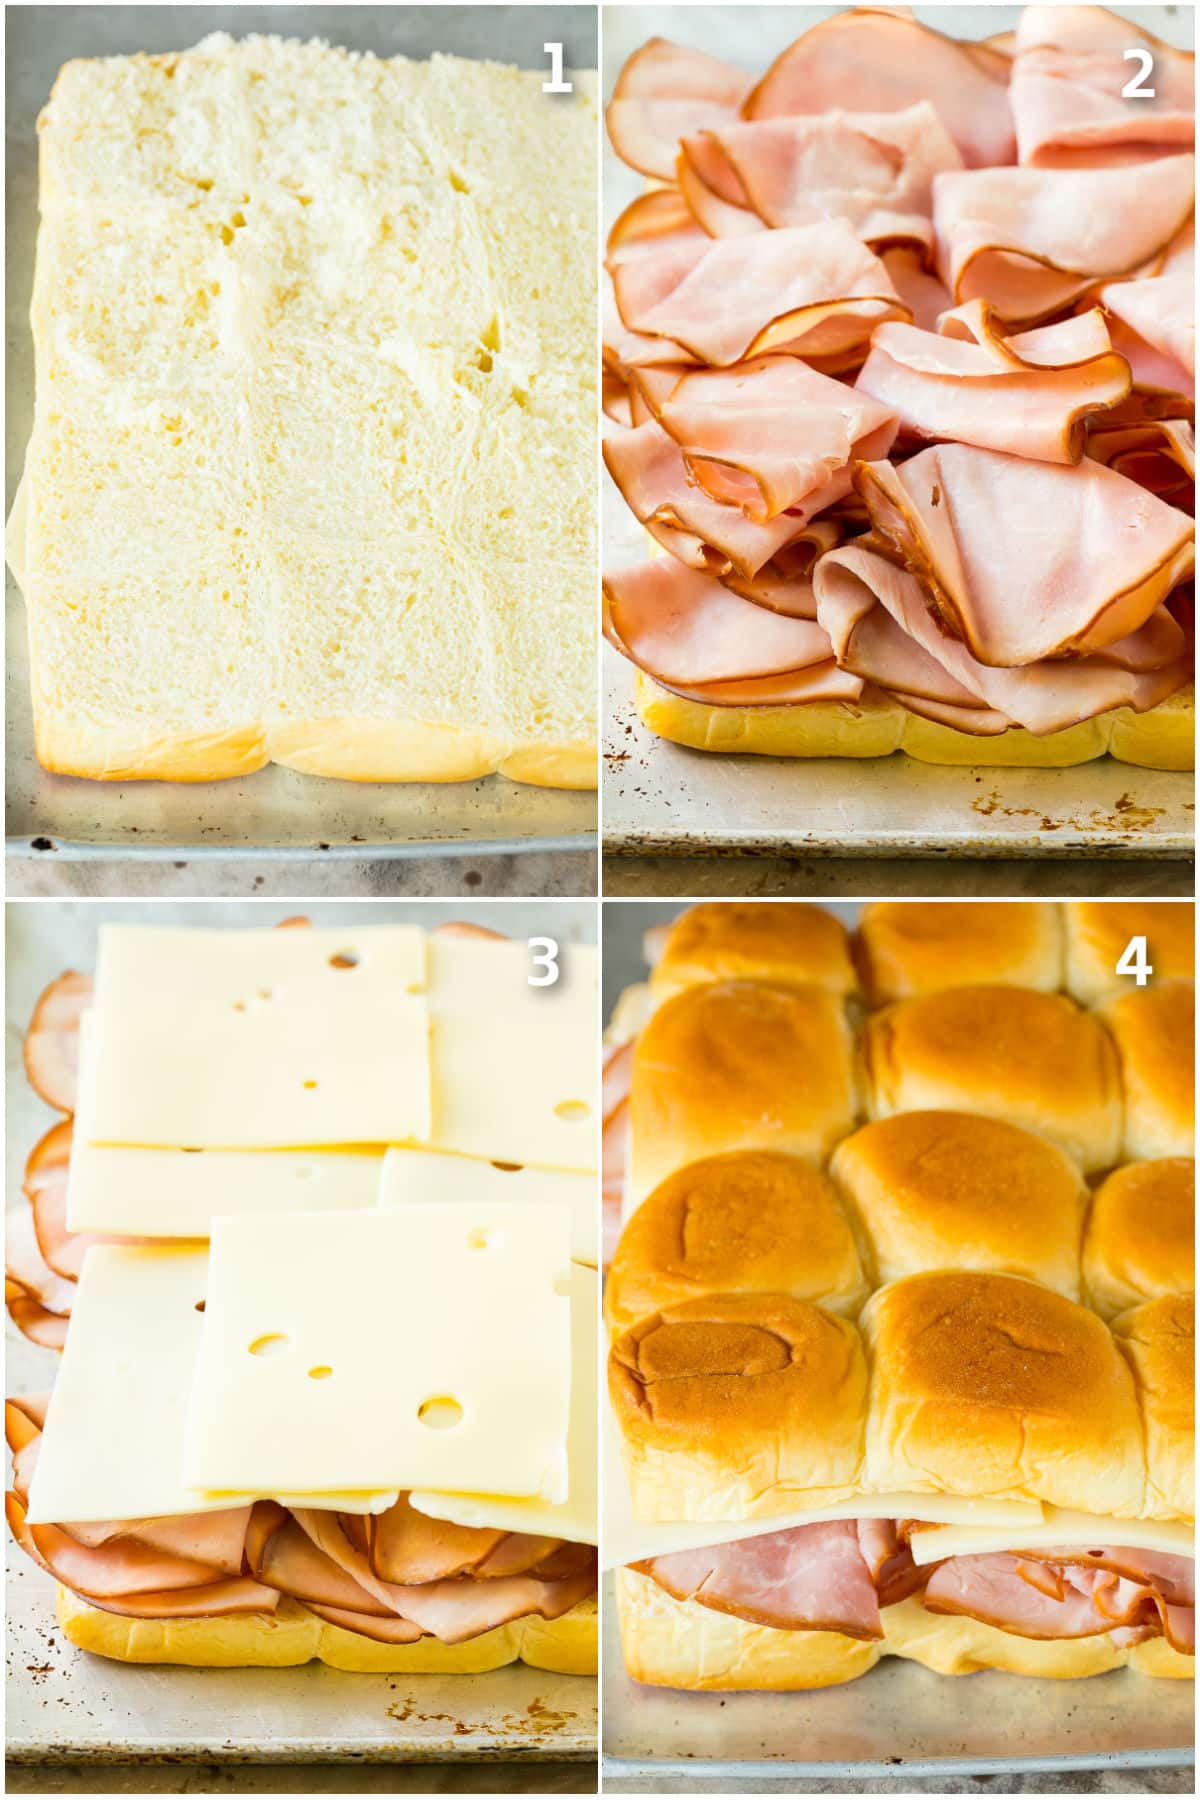 Process shots showing how to assemble ham and cheese sliders.